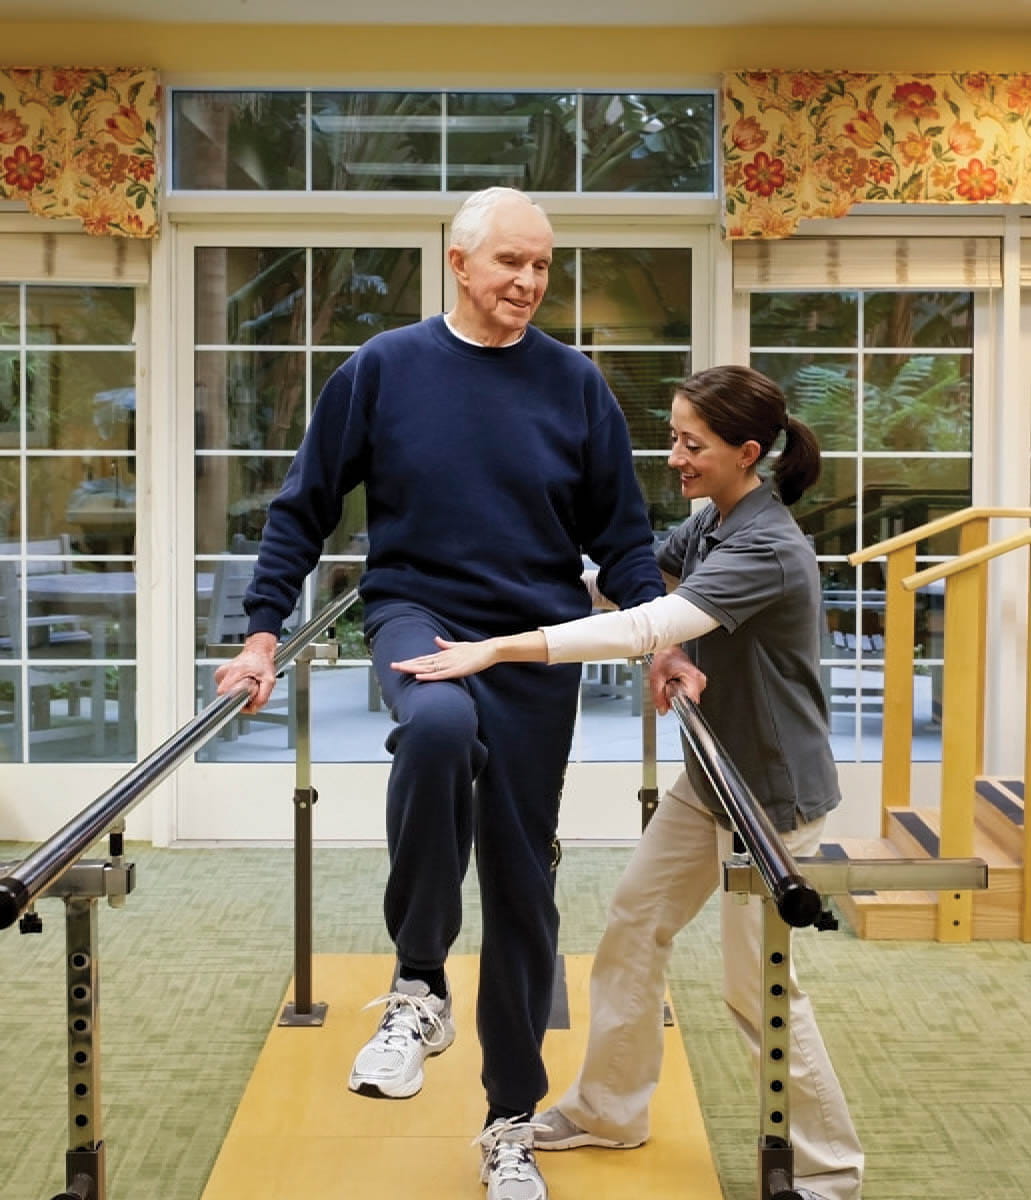 A man does exercises with help from a staff member.